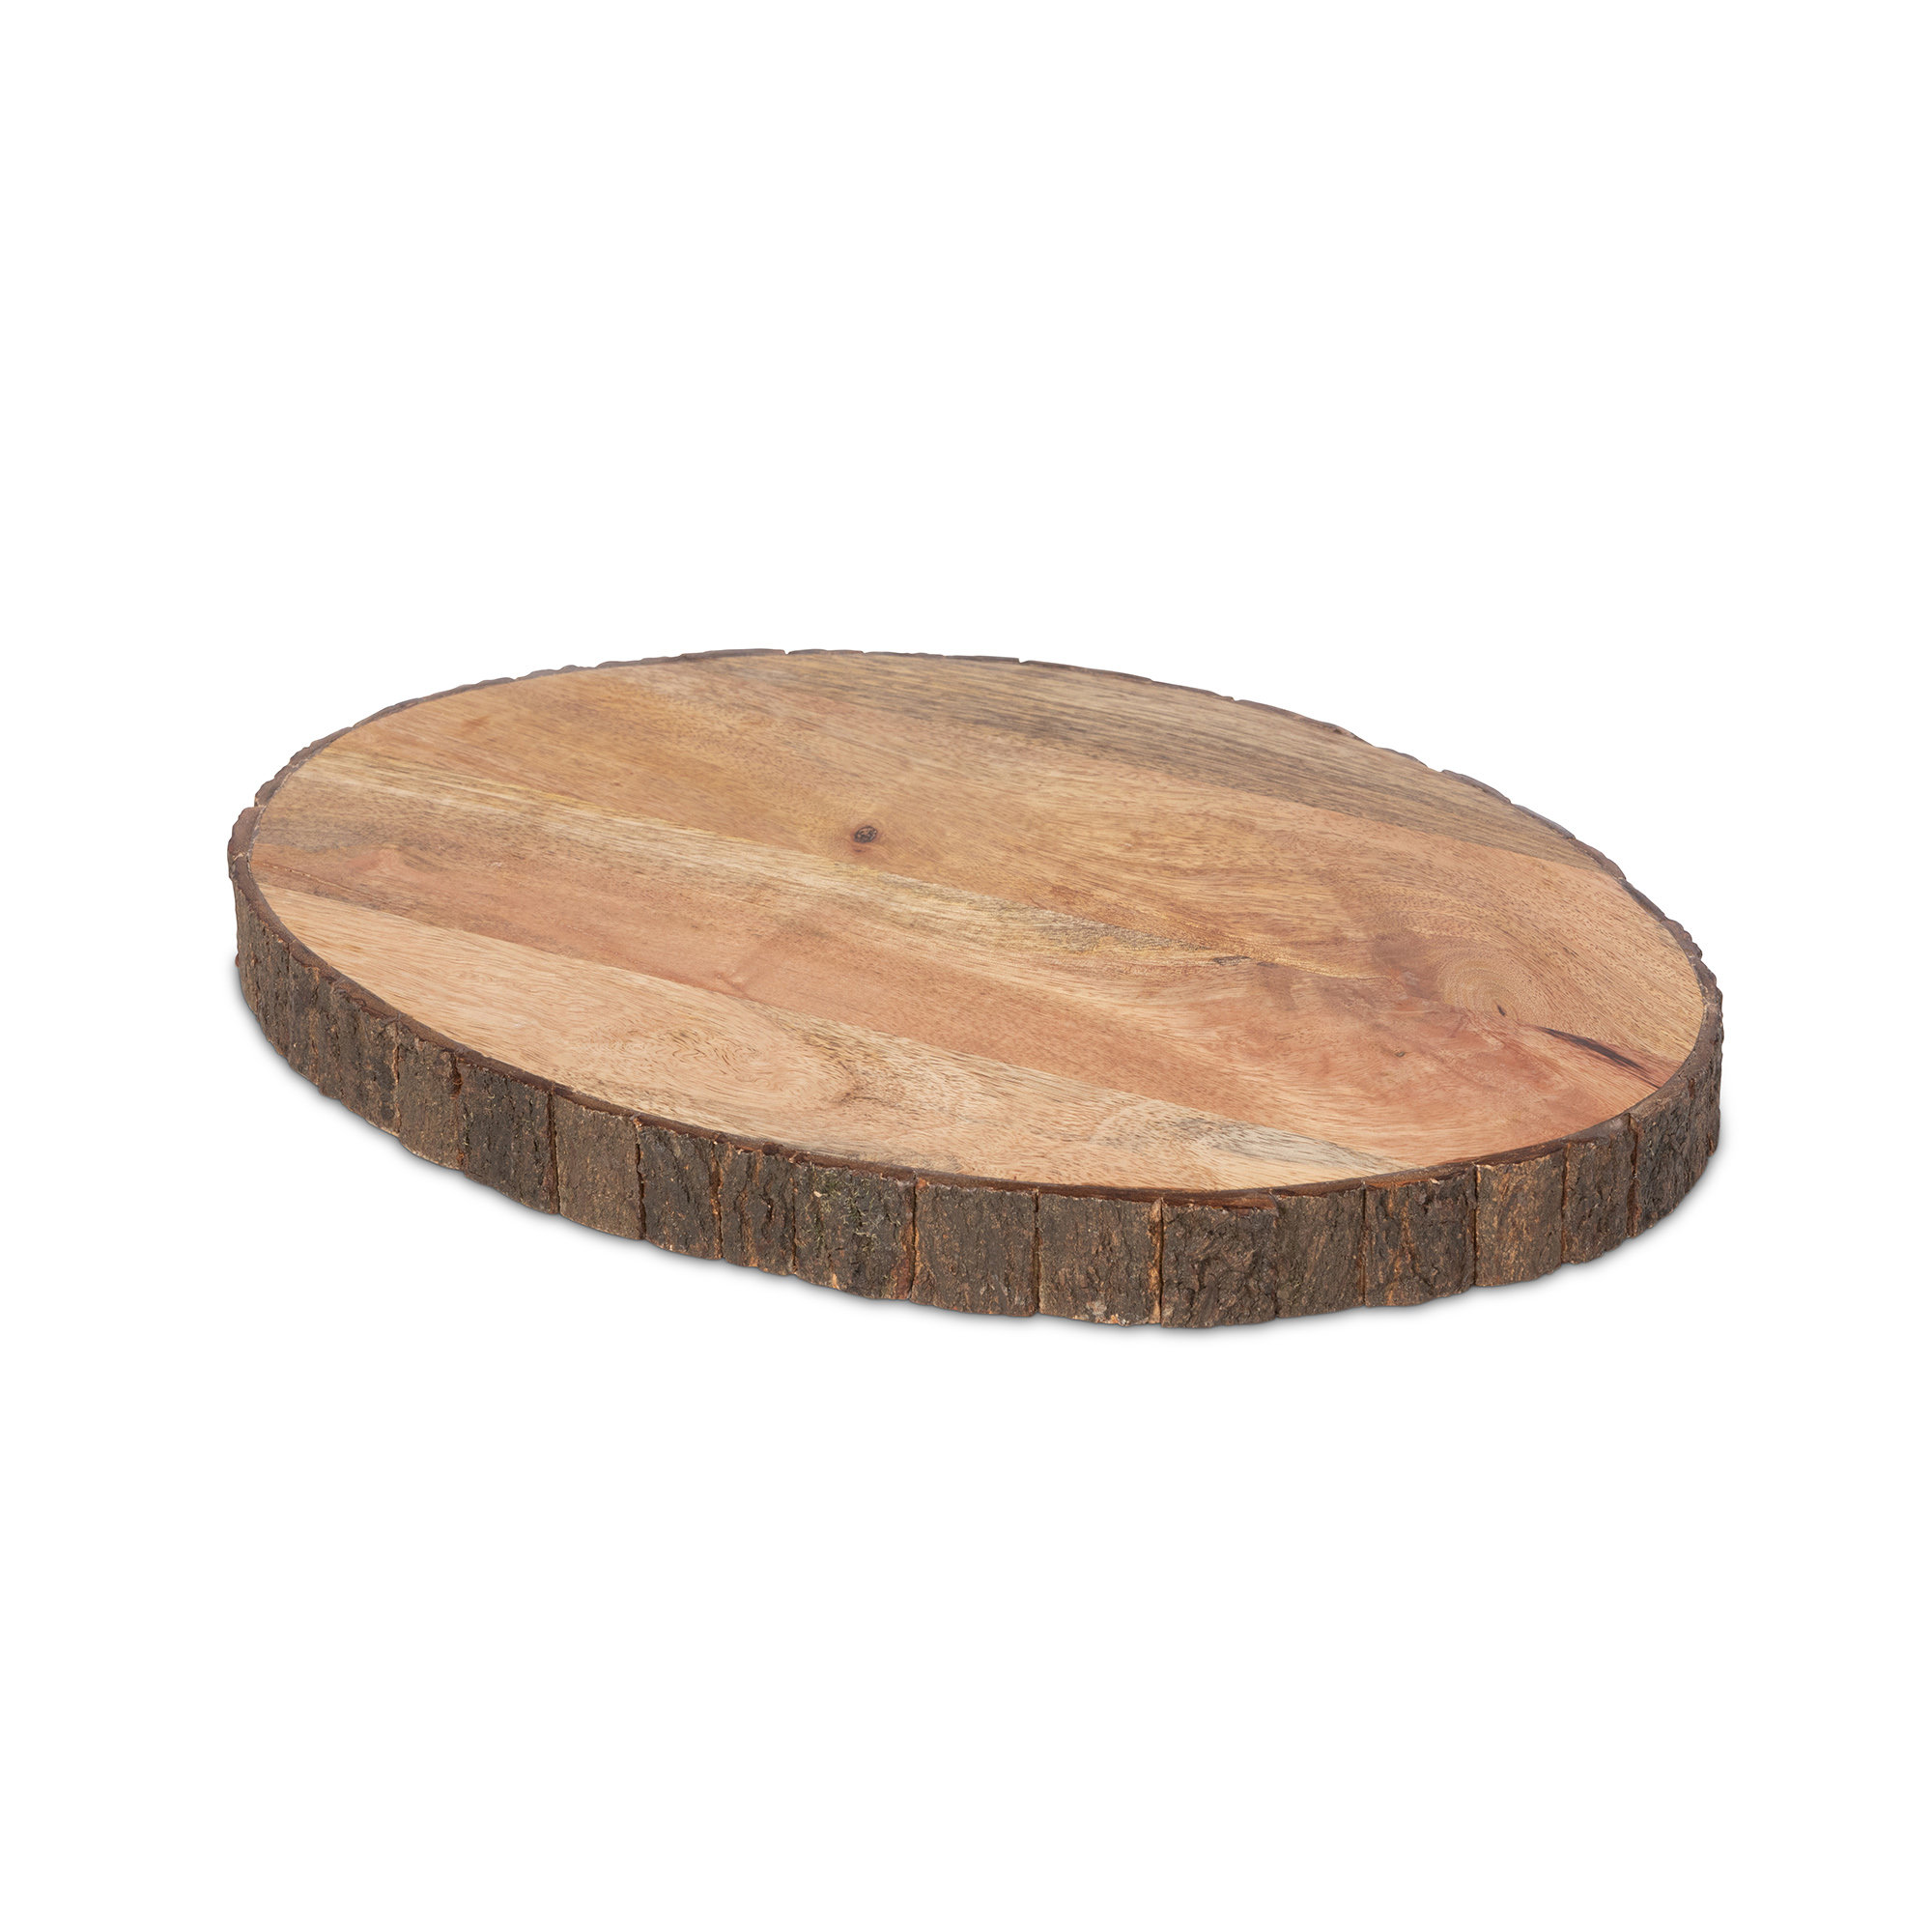 Park Hill Patterned Wood Chopping Board, Set of 2